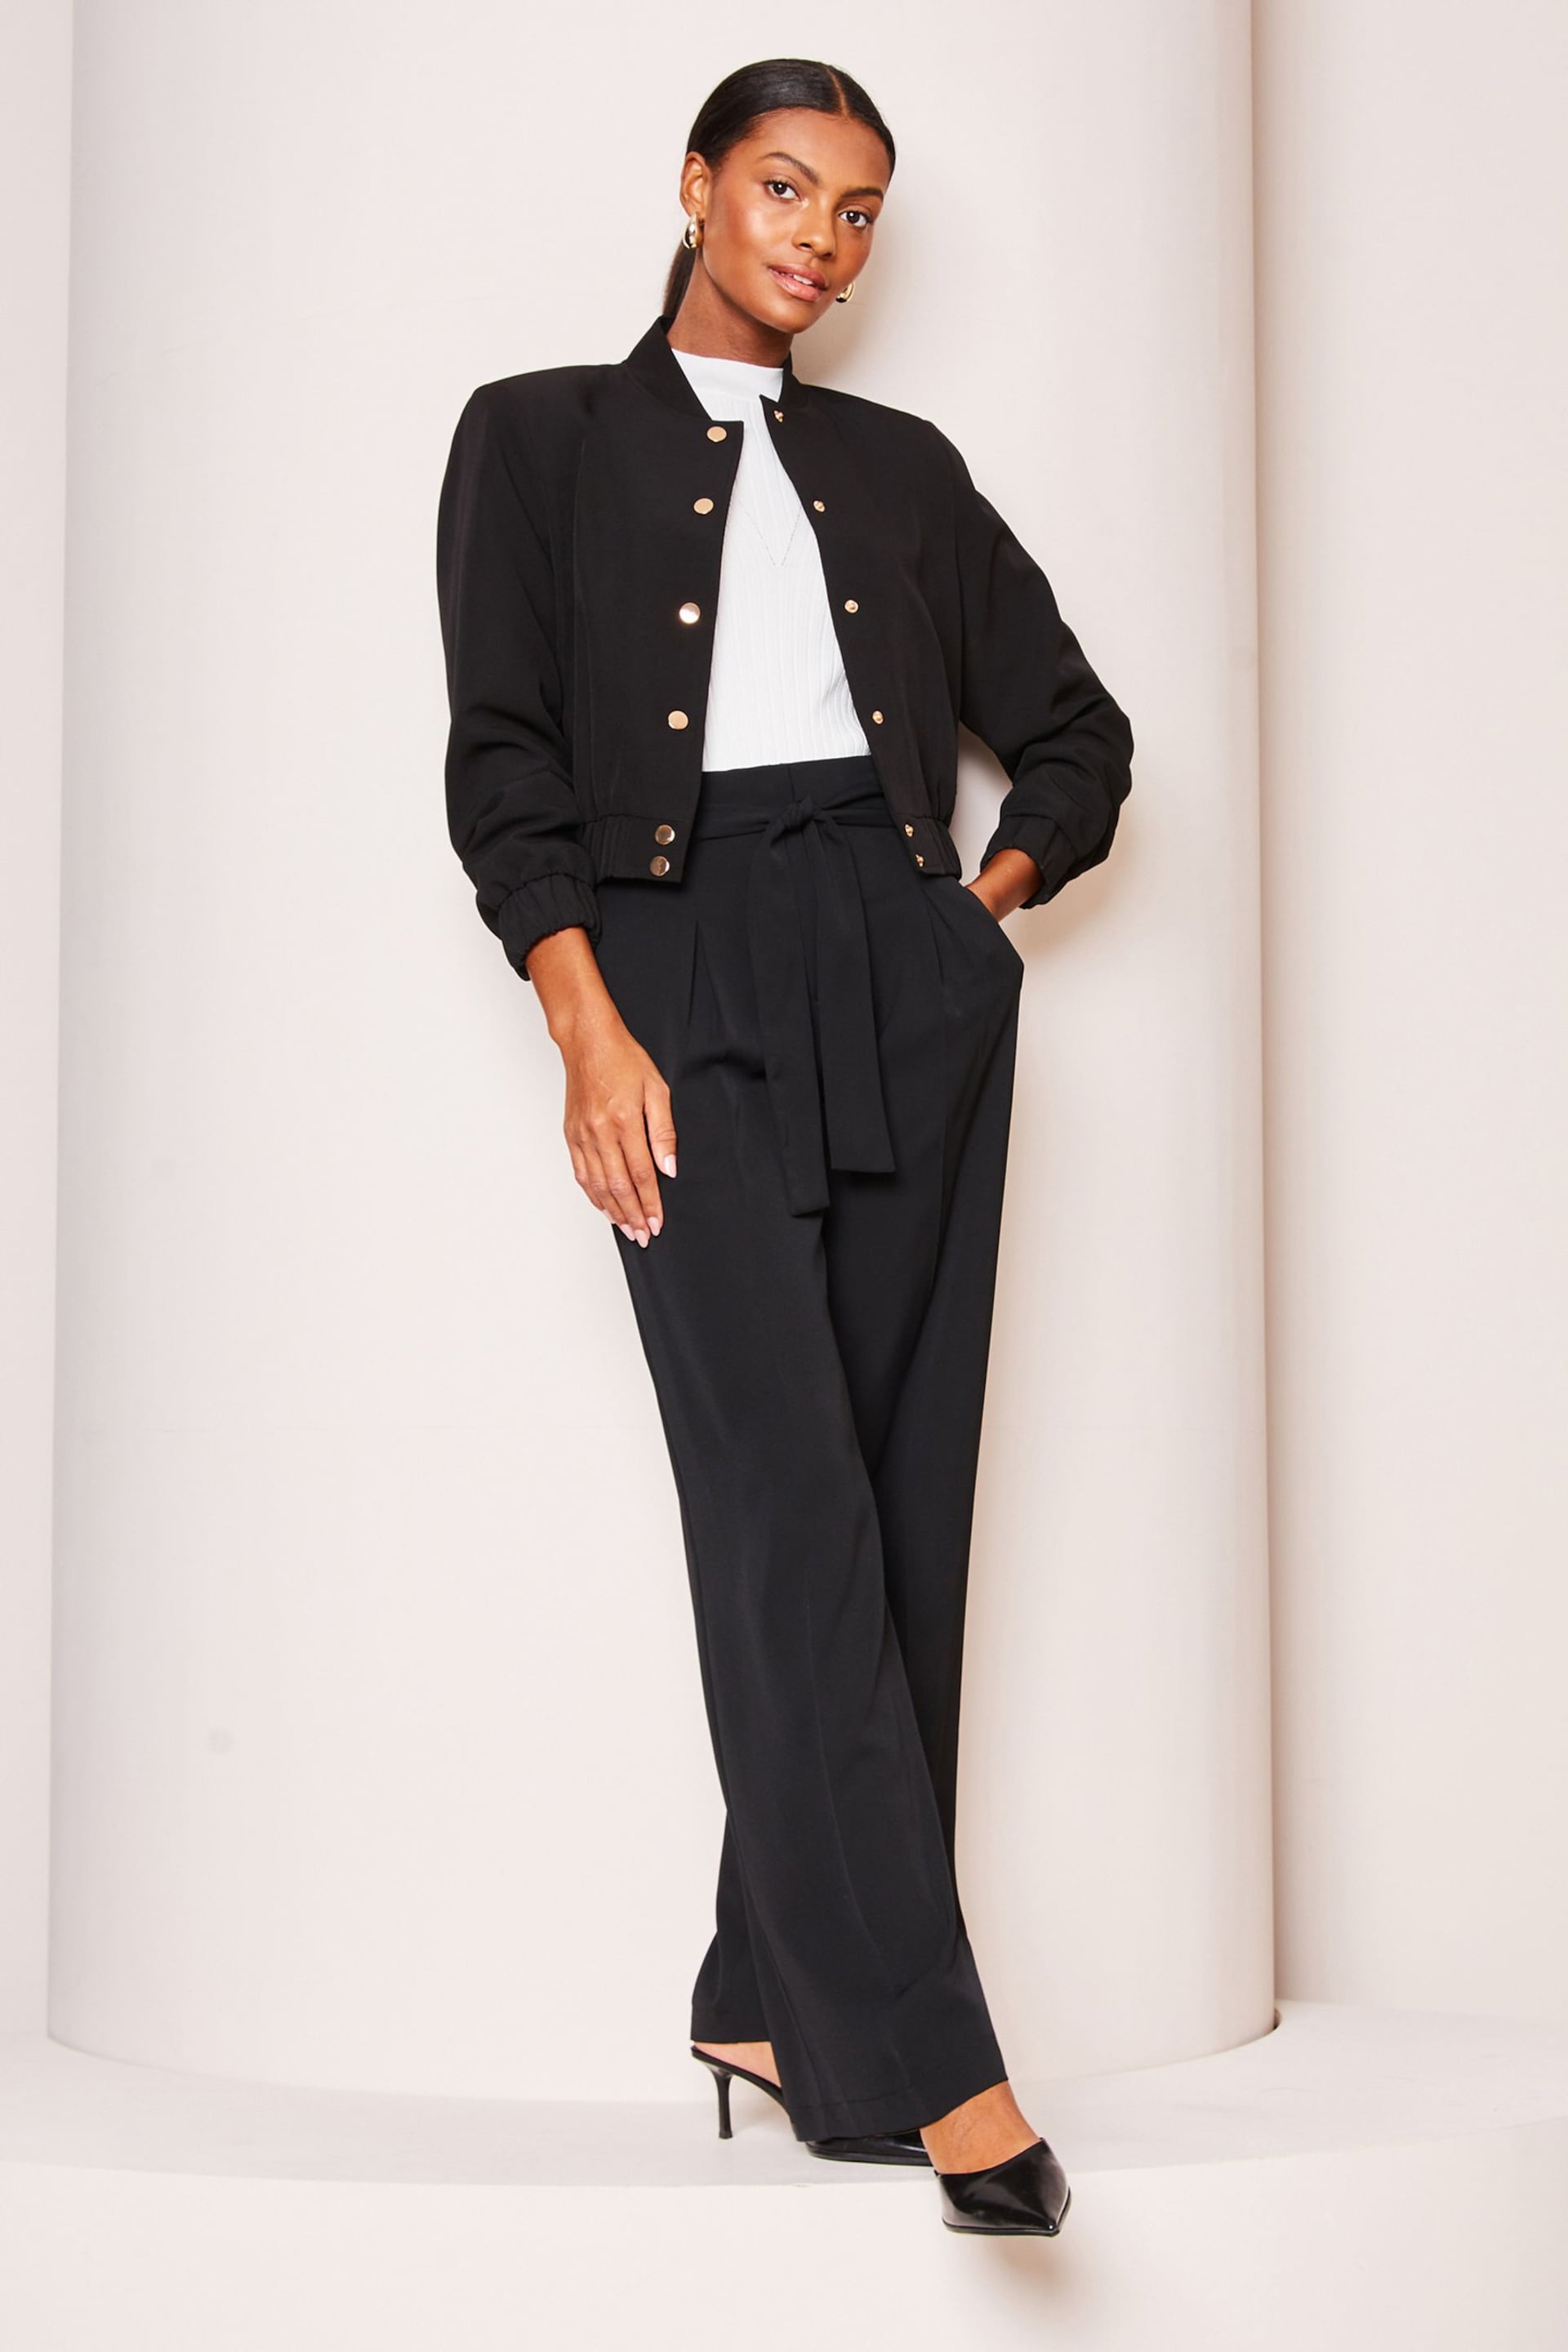 Lipsy Black Belted Wide Leg Trousers - Image 3 of 4